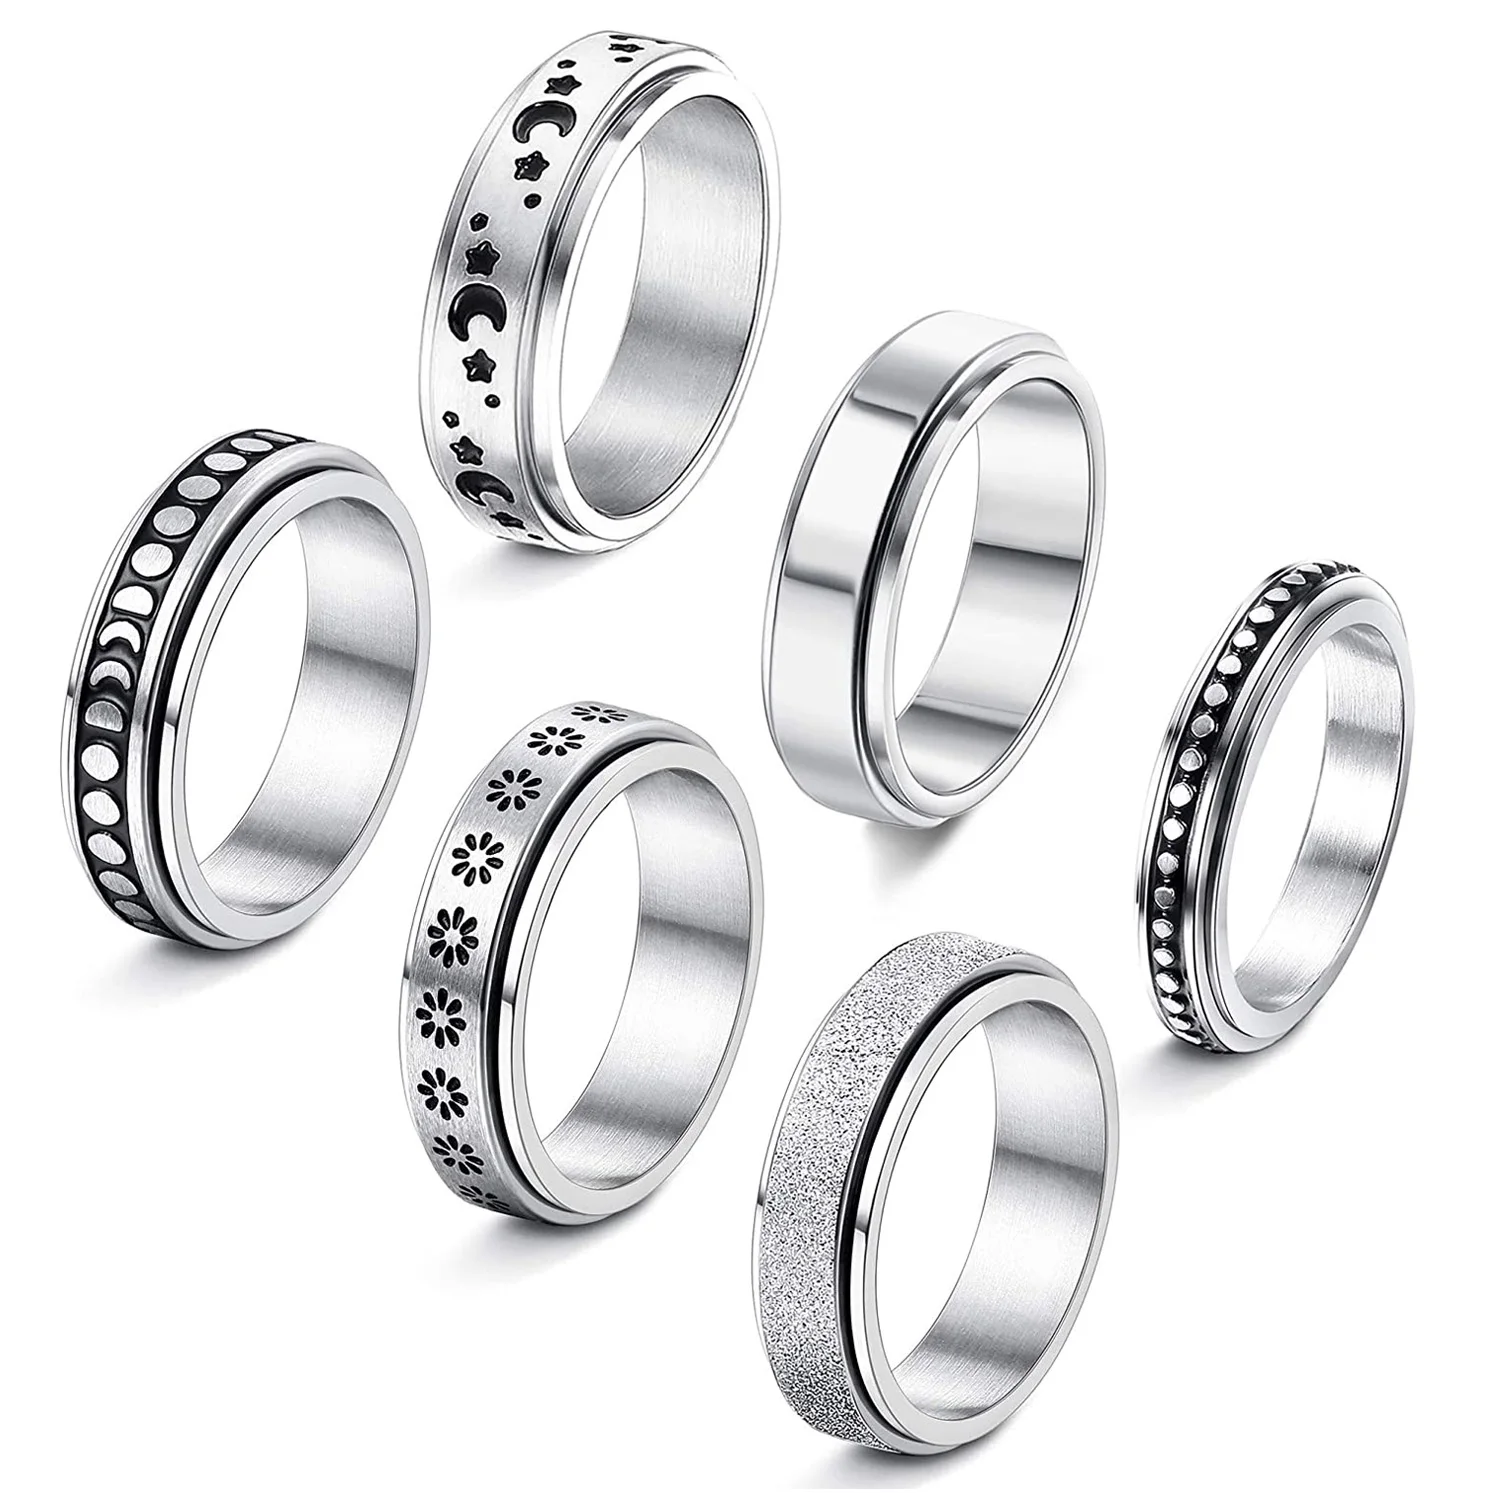 

GT Rotating Spinner Rings Men Jewelry Moon Star Heart Flower Stainless Steel Anxiety Spinning Ring